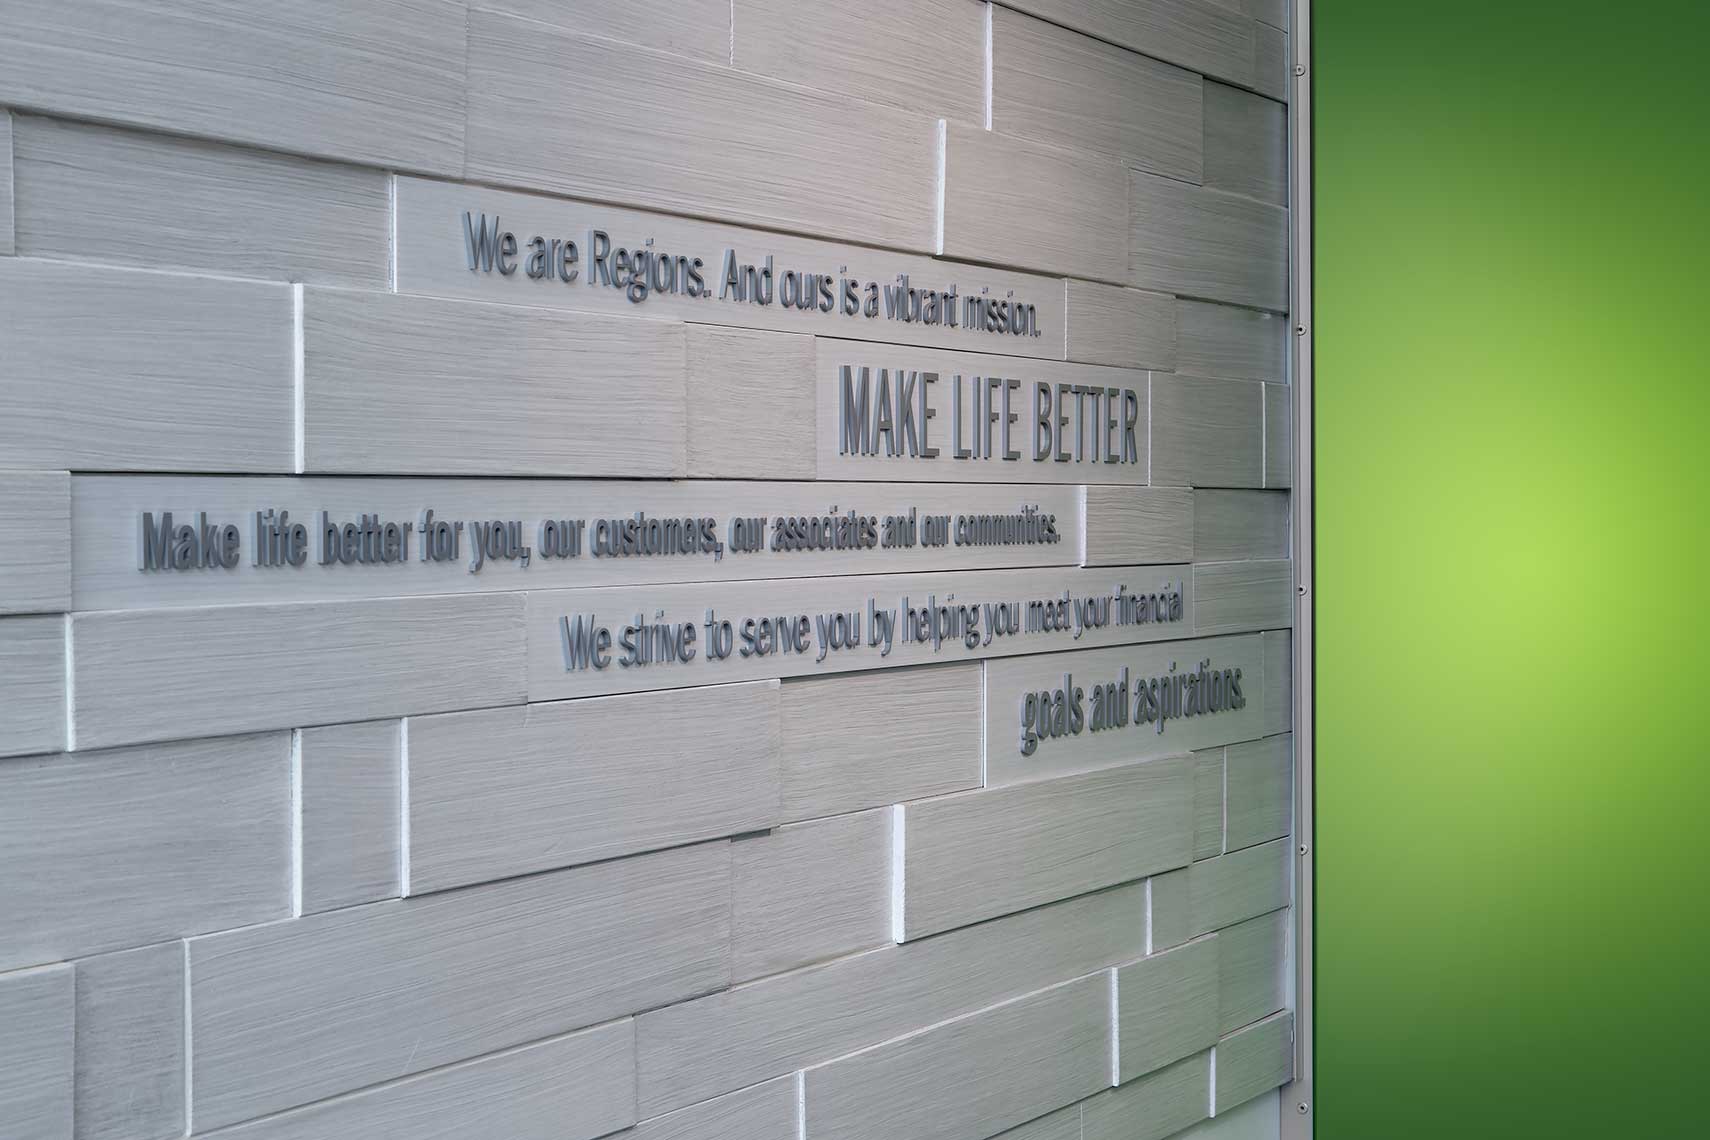 A view of the “message wall” showing some of the branding at Regions Bank in Germantown, TN